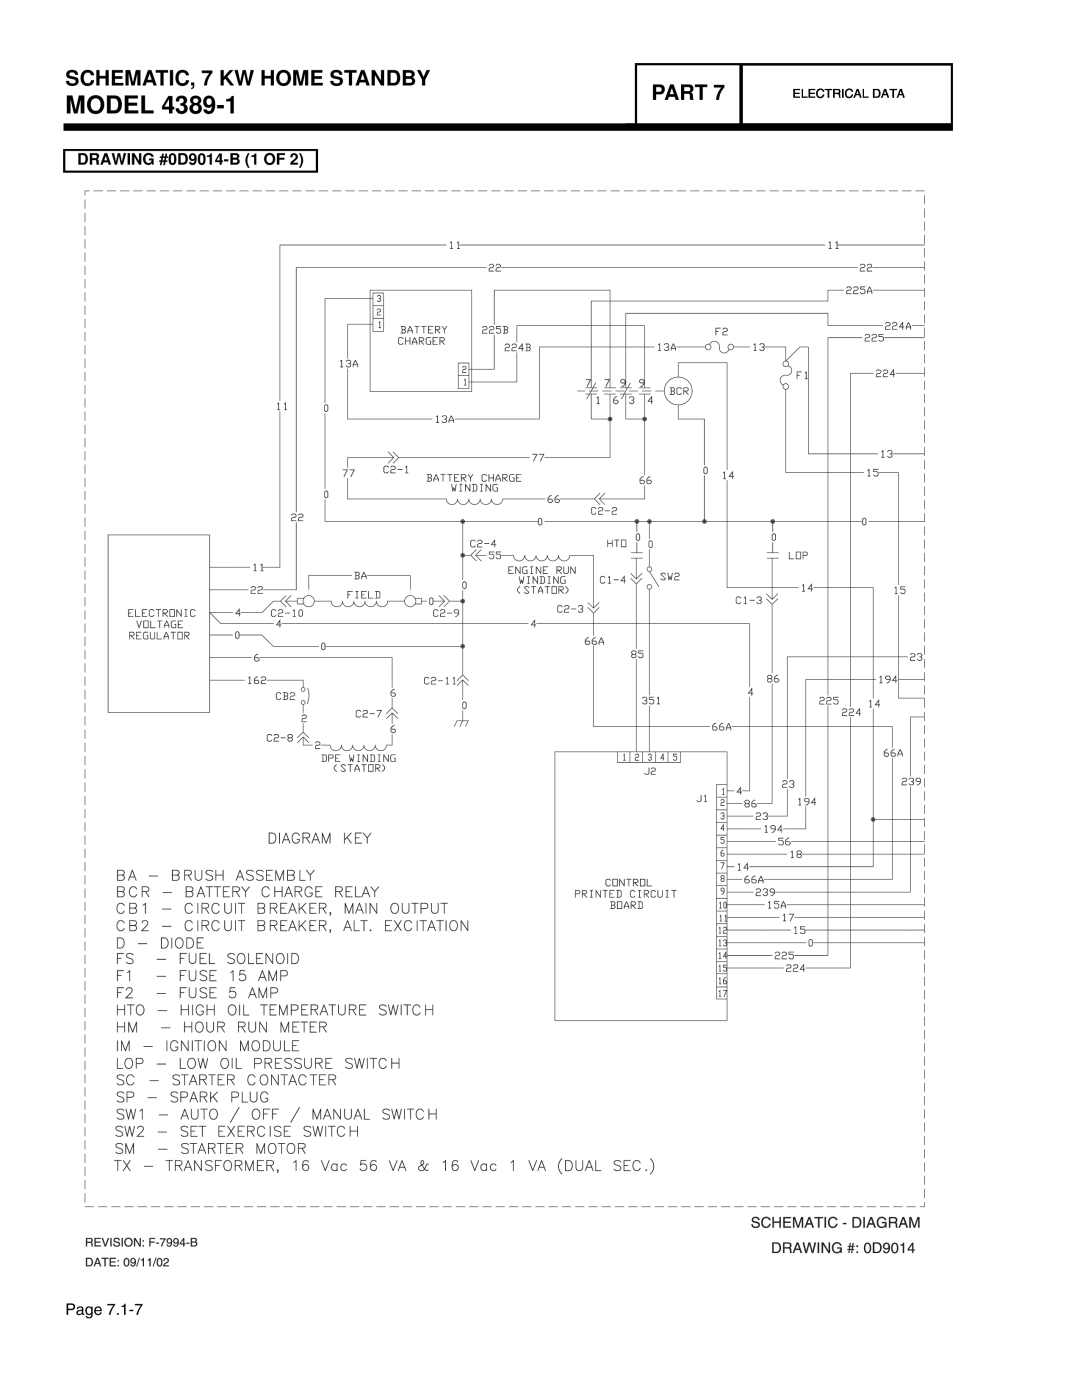 Guardian Technologies 4758, 4456, 4390 Model, SCHEMATIC, 7 KW HOME STANDBY, Part, DRAWING #0D9014-B 1 OF, Electrical Data 